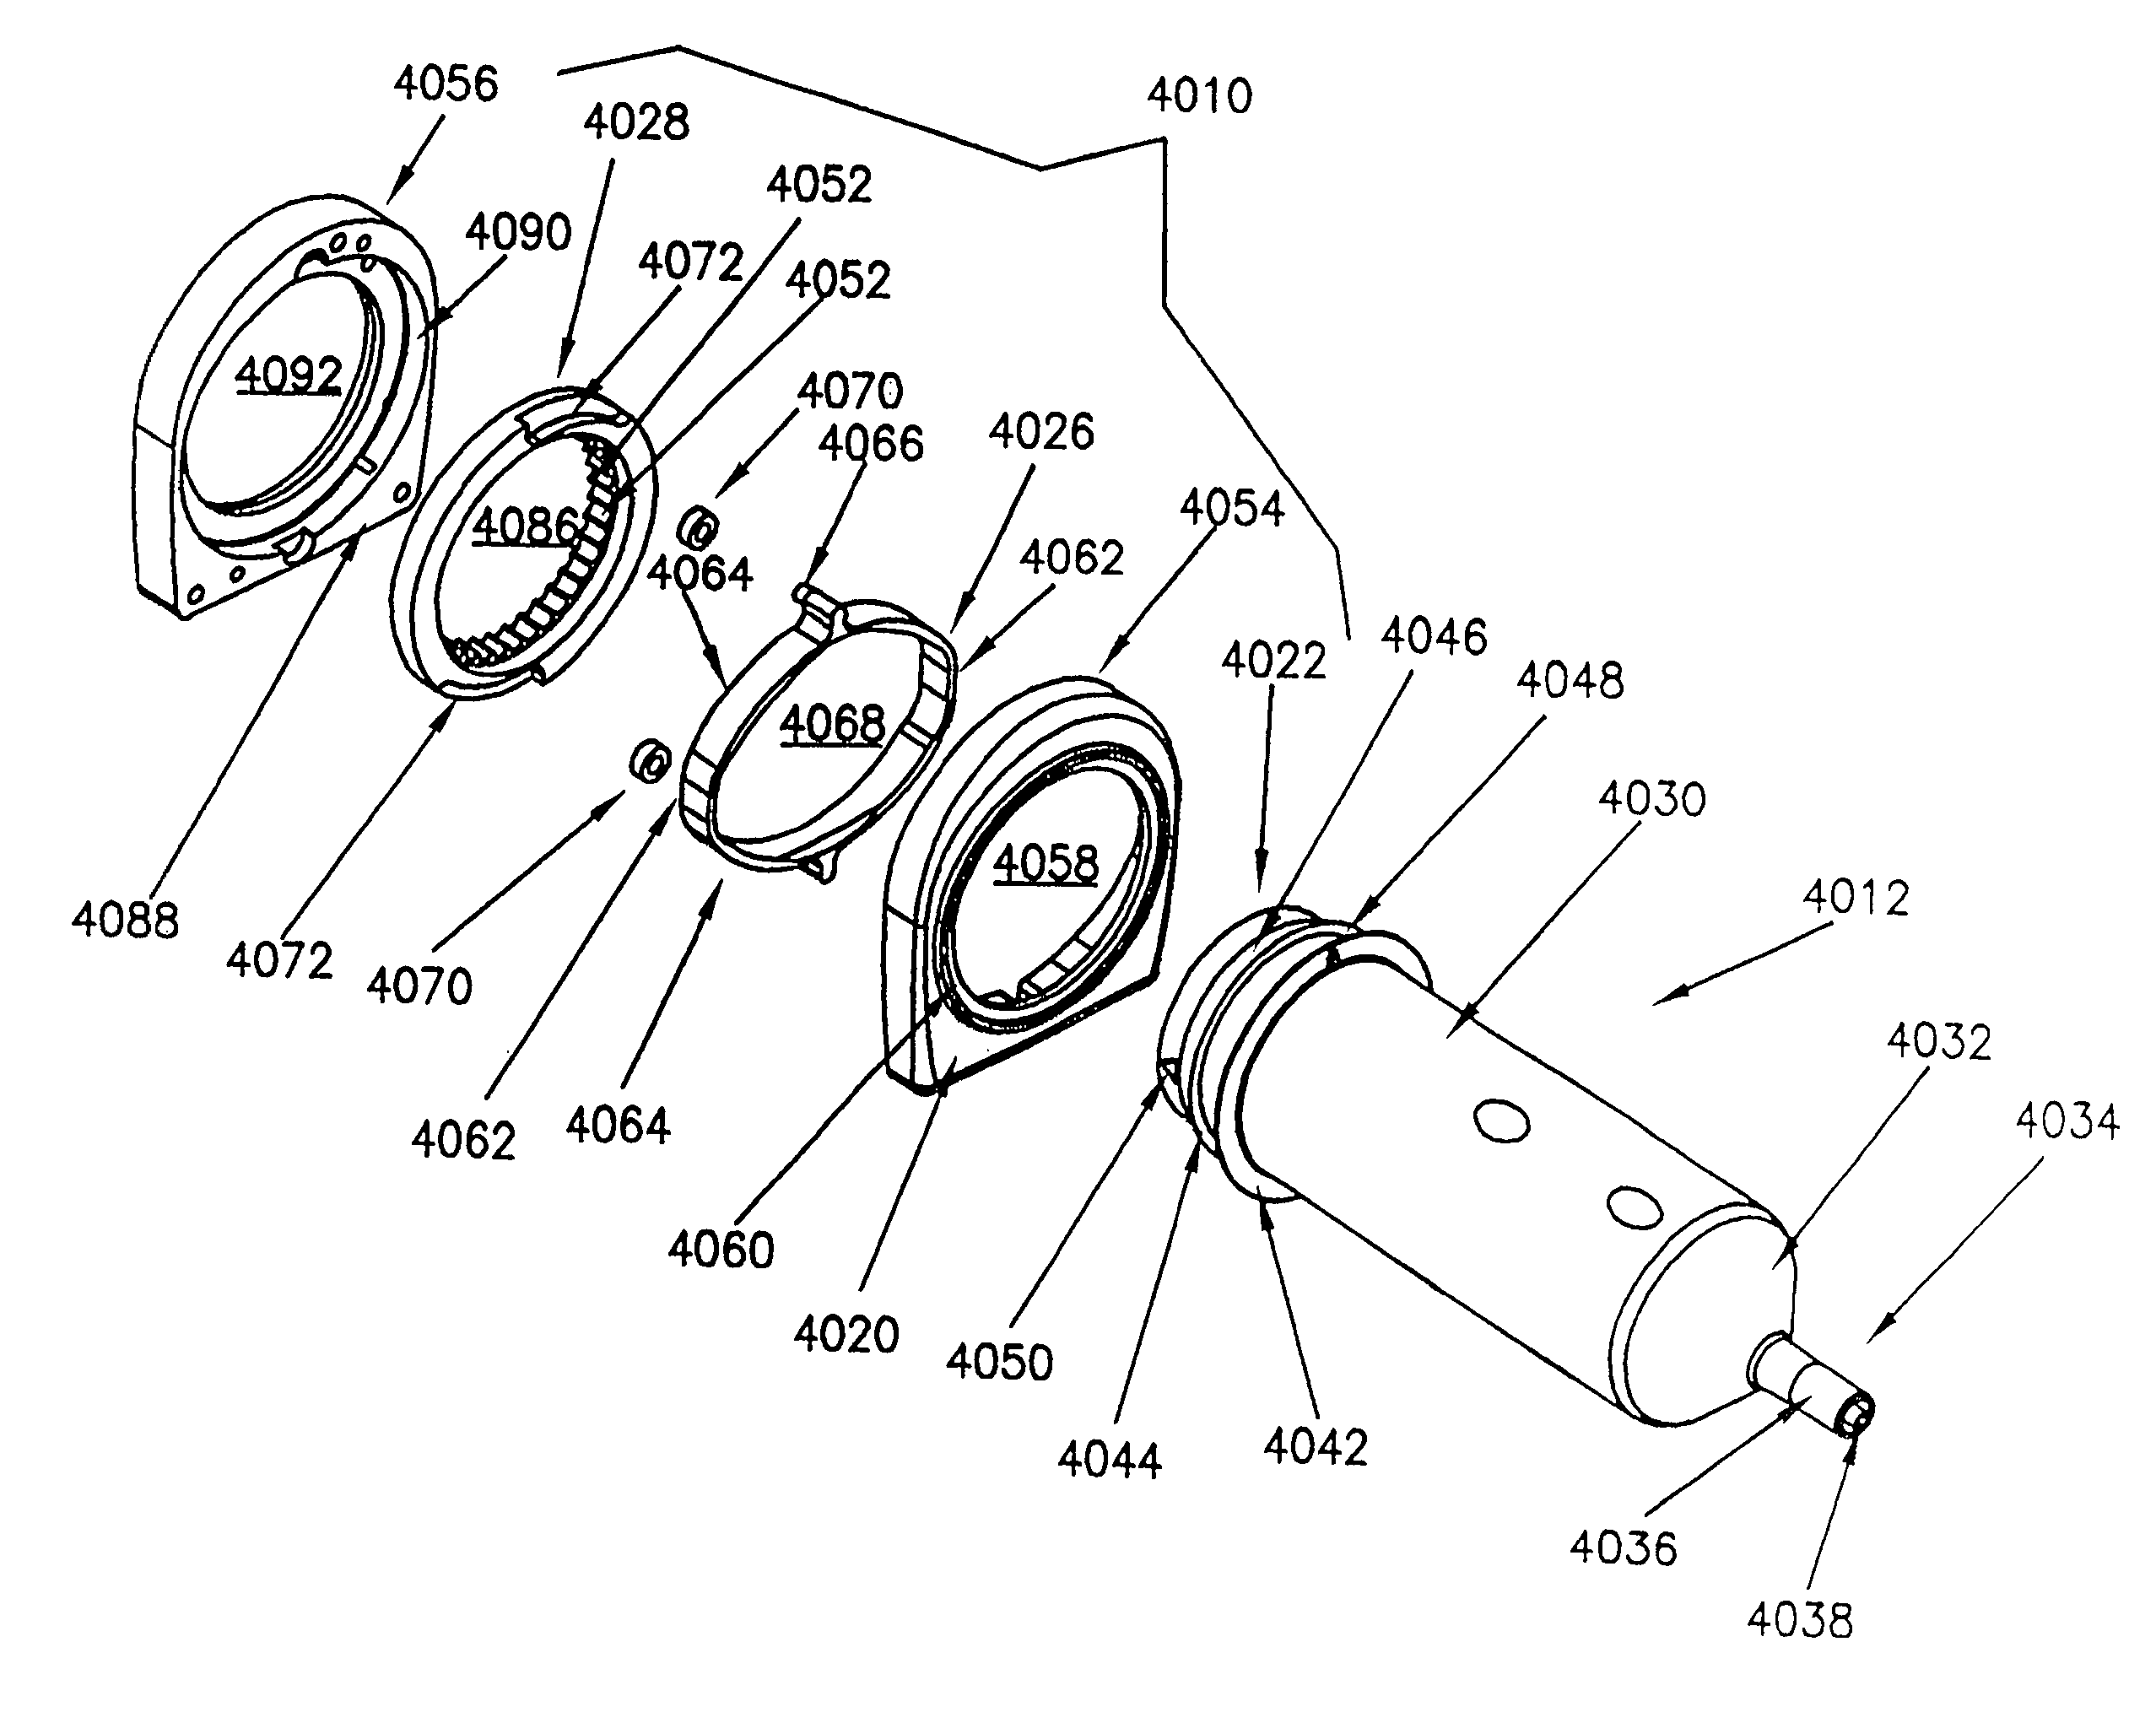 Front-loading medical injector adapted to releasably engage a syringe regardless of the orientation of the syringe with respect to the injector